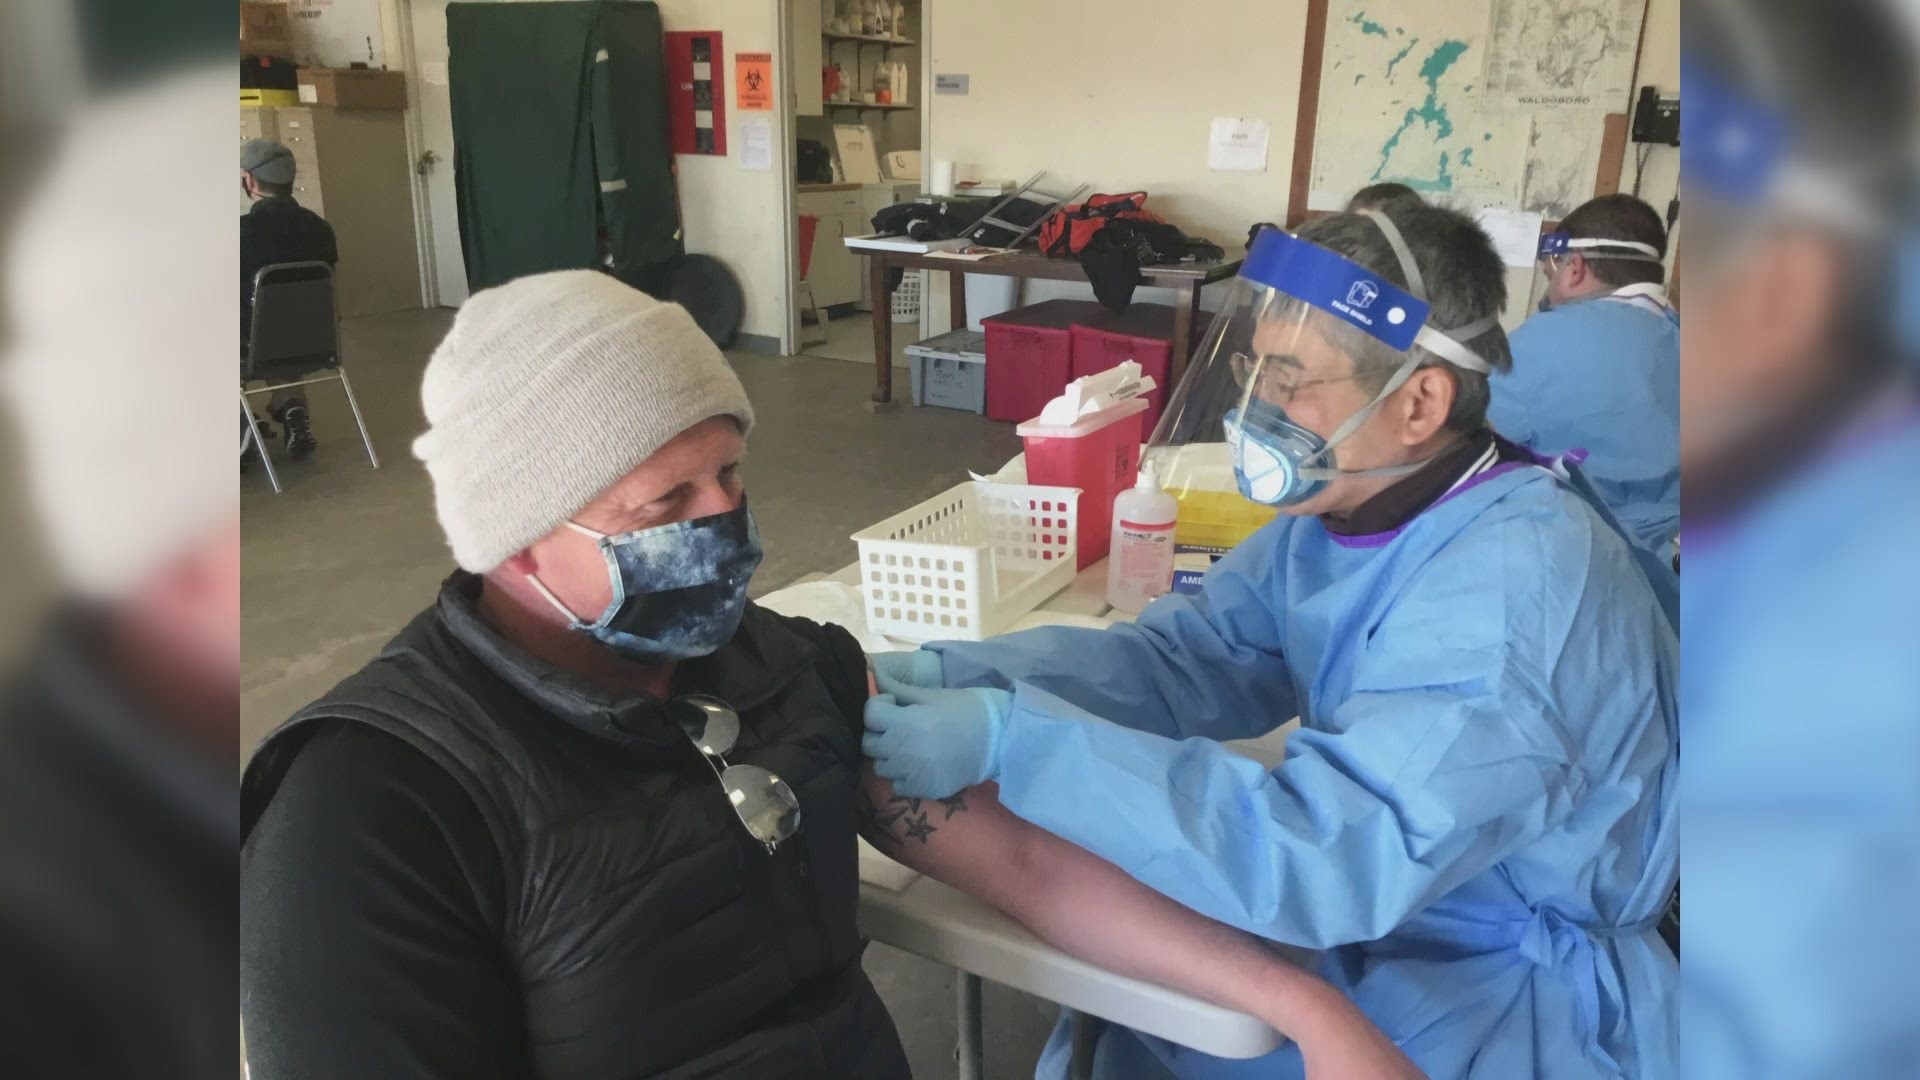 100 additional Maine police officers and firefighters got their first dose of the COVID-19 vaccine on Saturday.